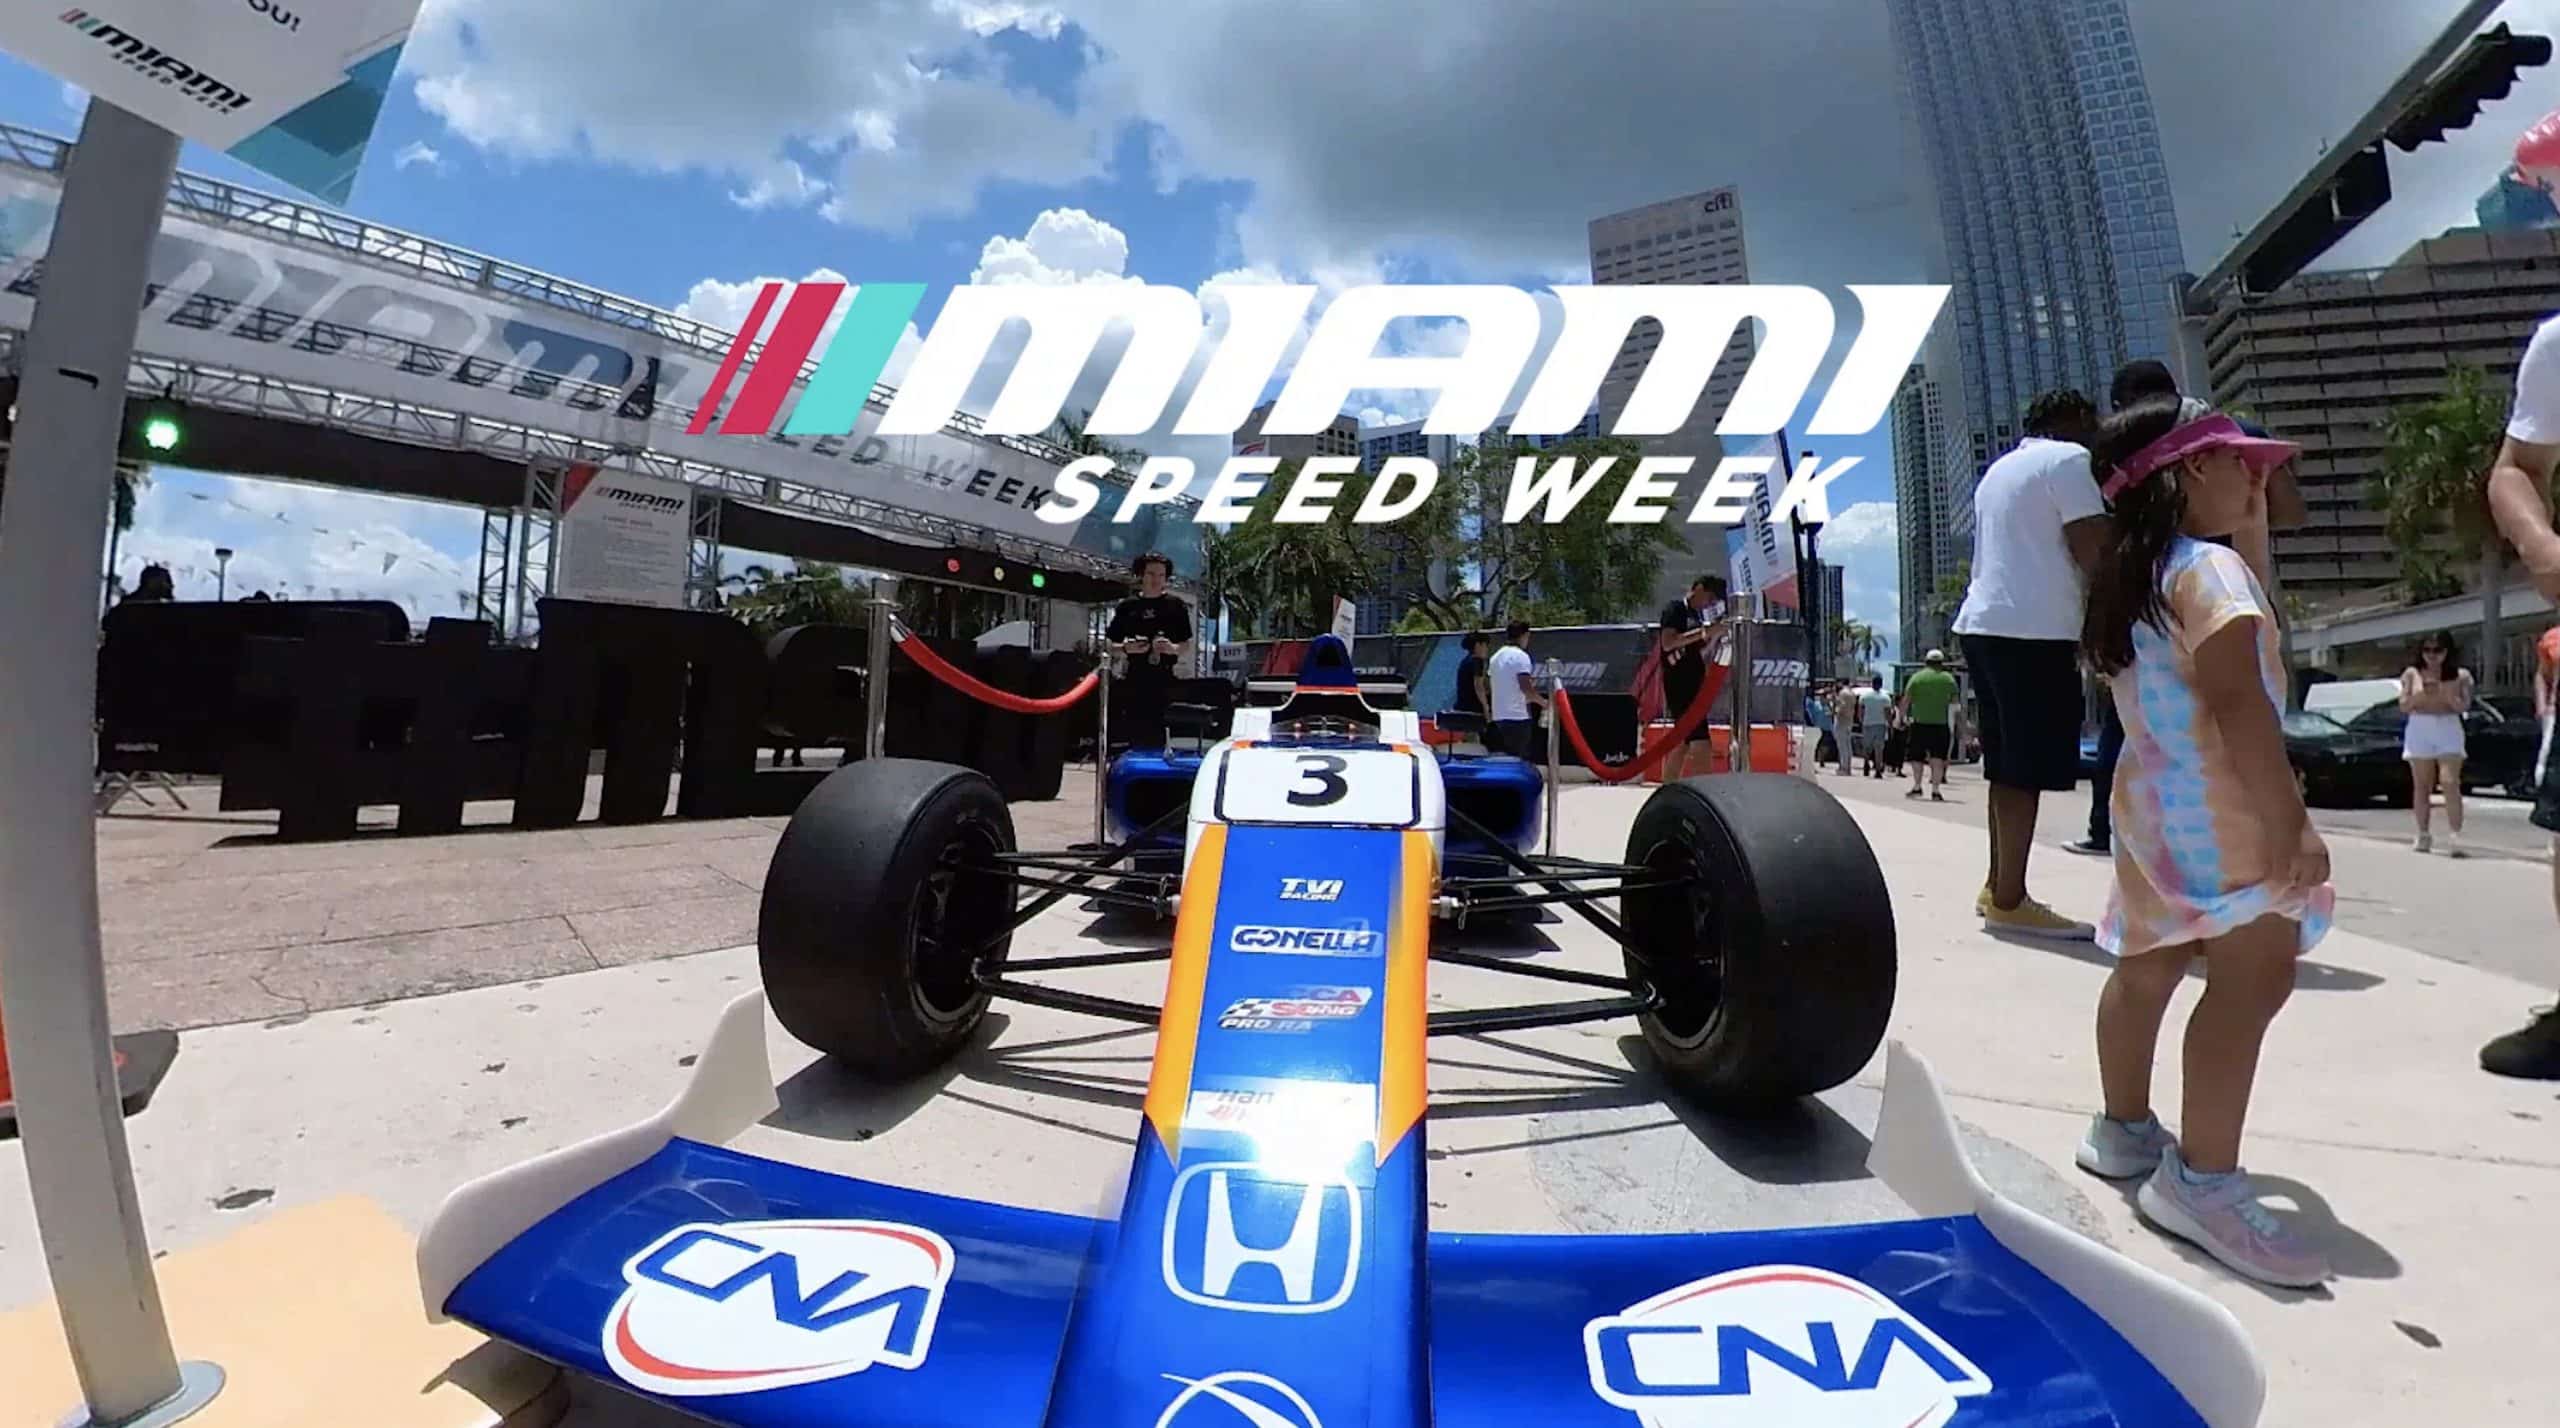 WITH THE HIGHLY ANTICIPATED INAUGURAL MIAMI GRAND PRIX TAKING PLACE IN MAY, MIAMI SPEED WEEK WILL BE THE BIGGEST AND BEST CELEBRATION CONVERGING EVERYTHING RACING AND ENTERTAINMENT.